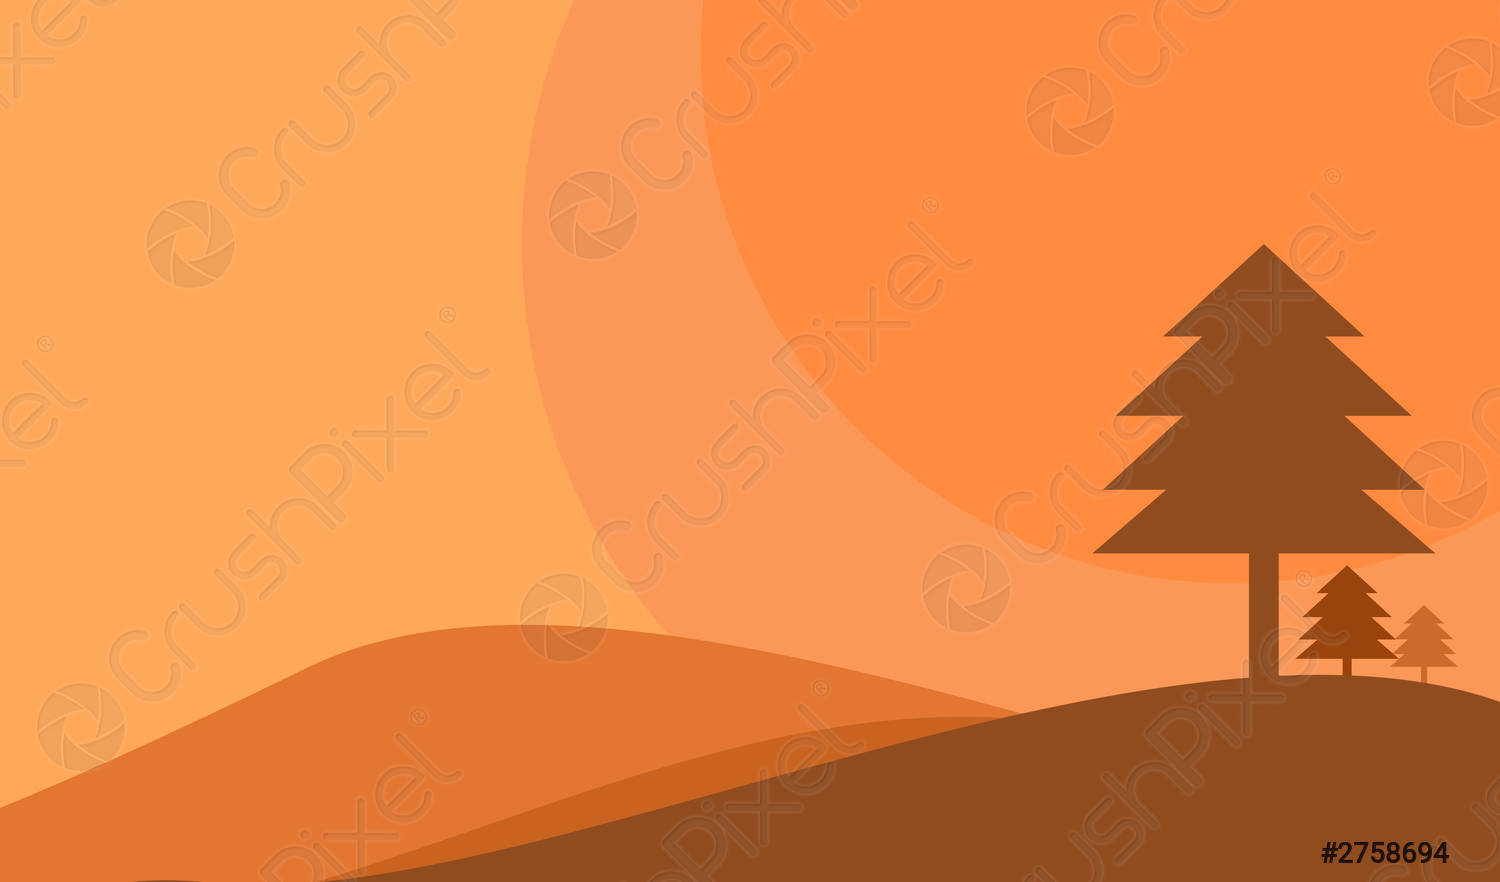 Abstract sunset landscape flat background illustration Suitable for banners, wallpaper